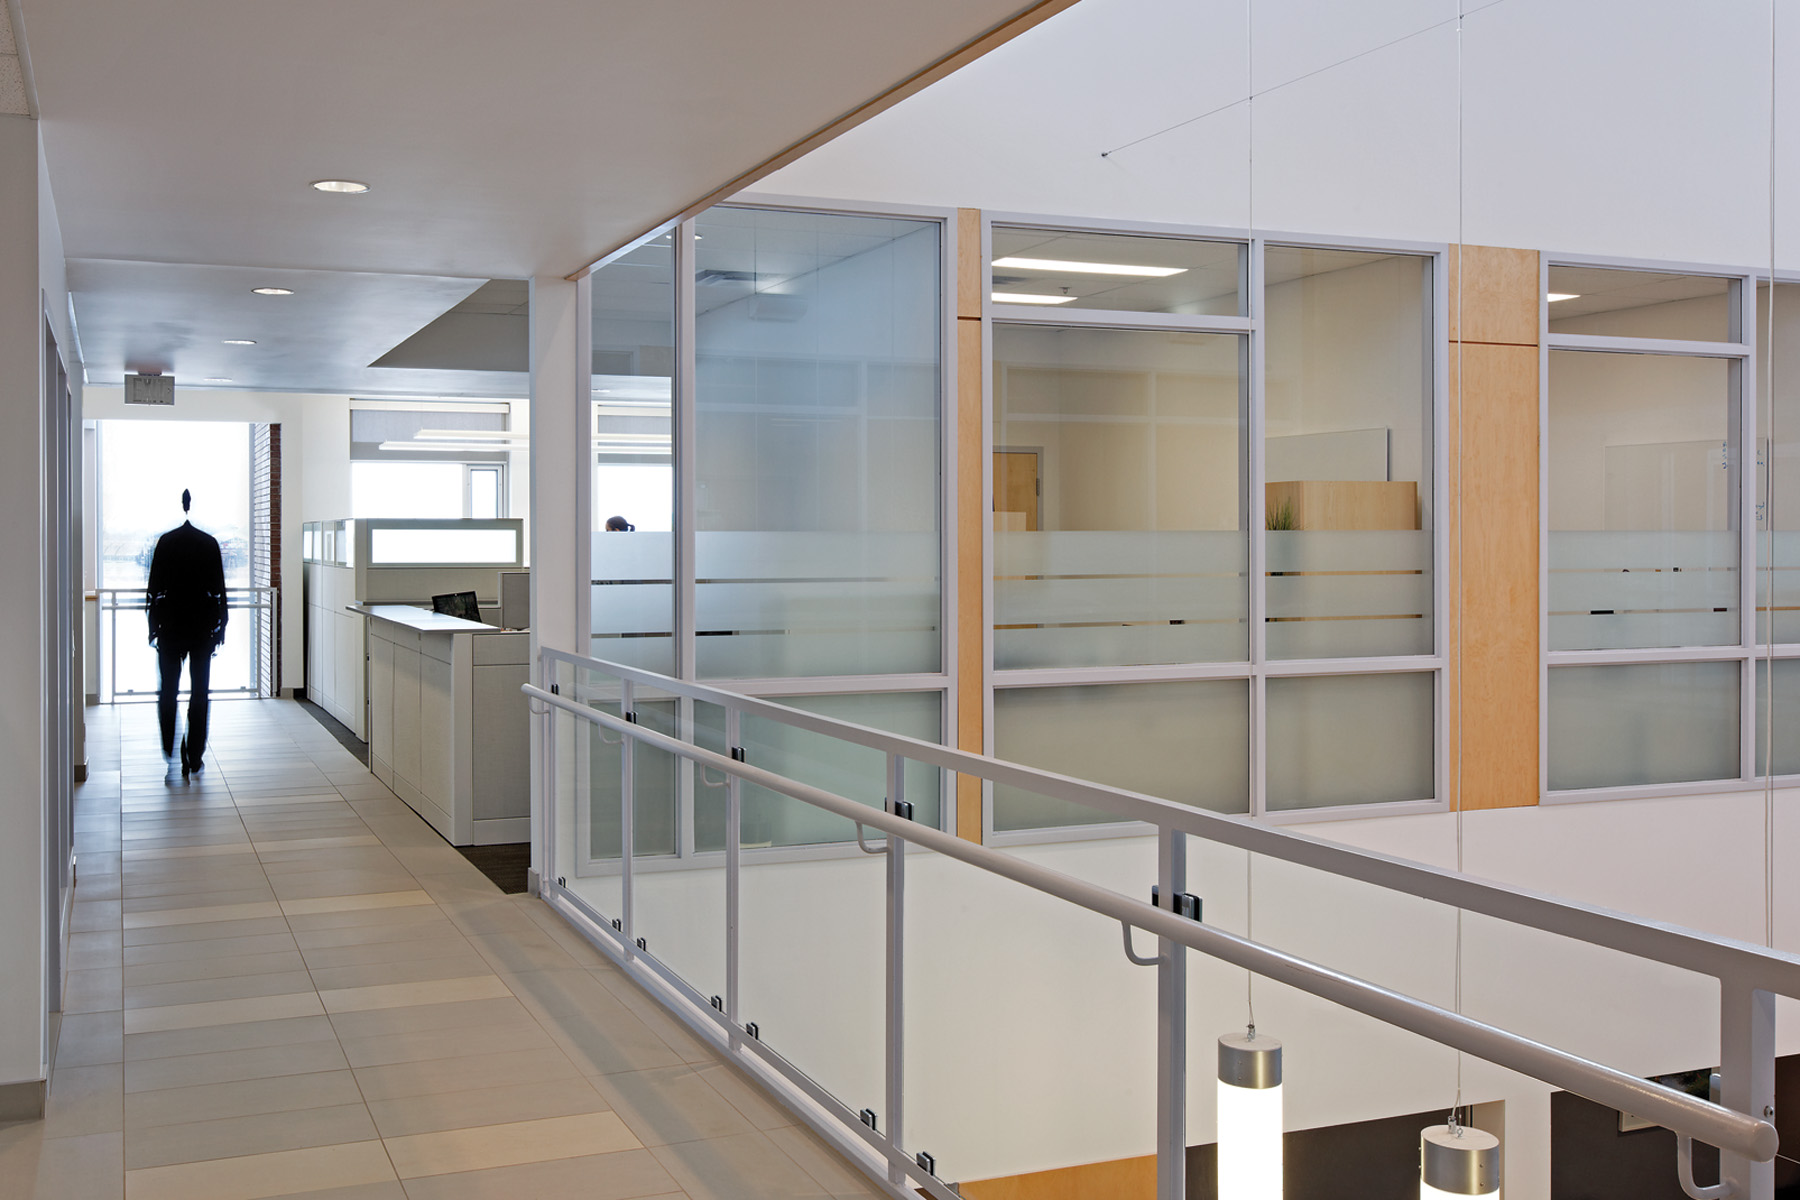 Open second storey corridor with glass partition overlooking double height front entrance atrium with workstations at end of corridor